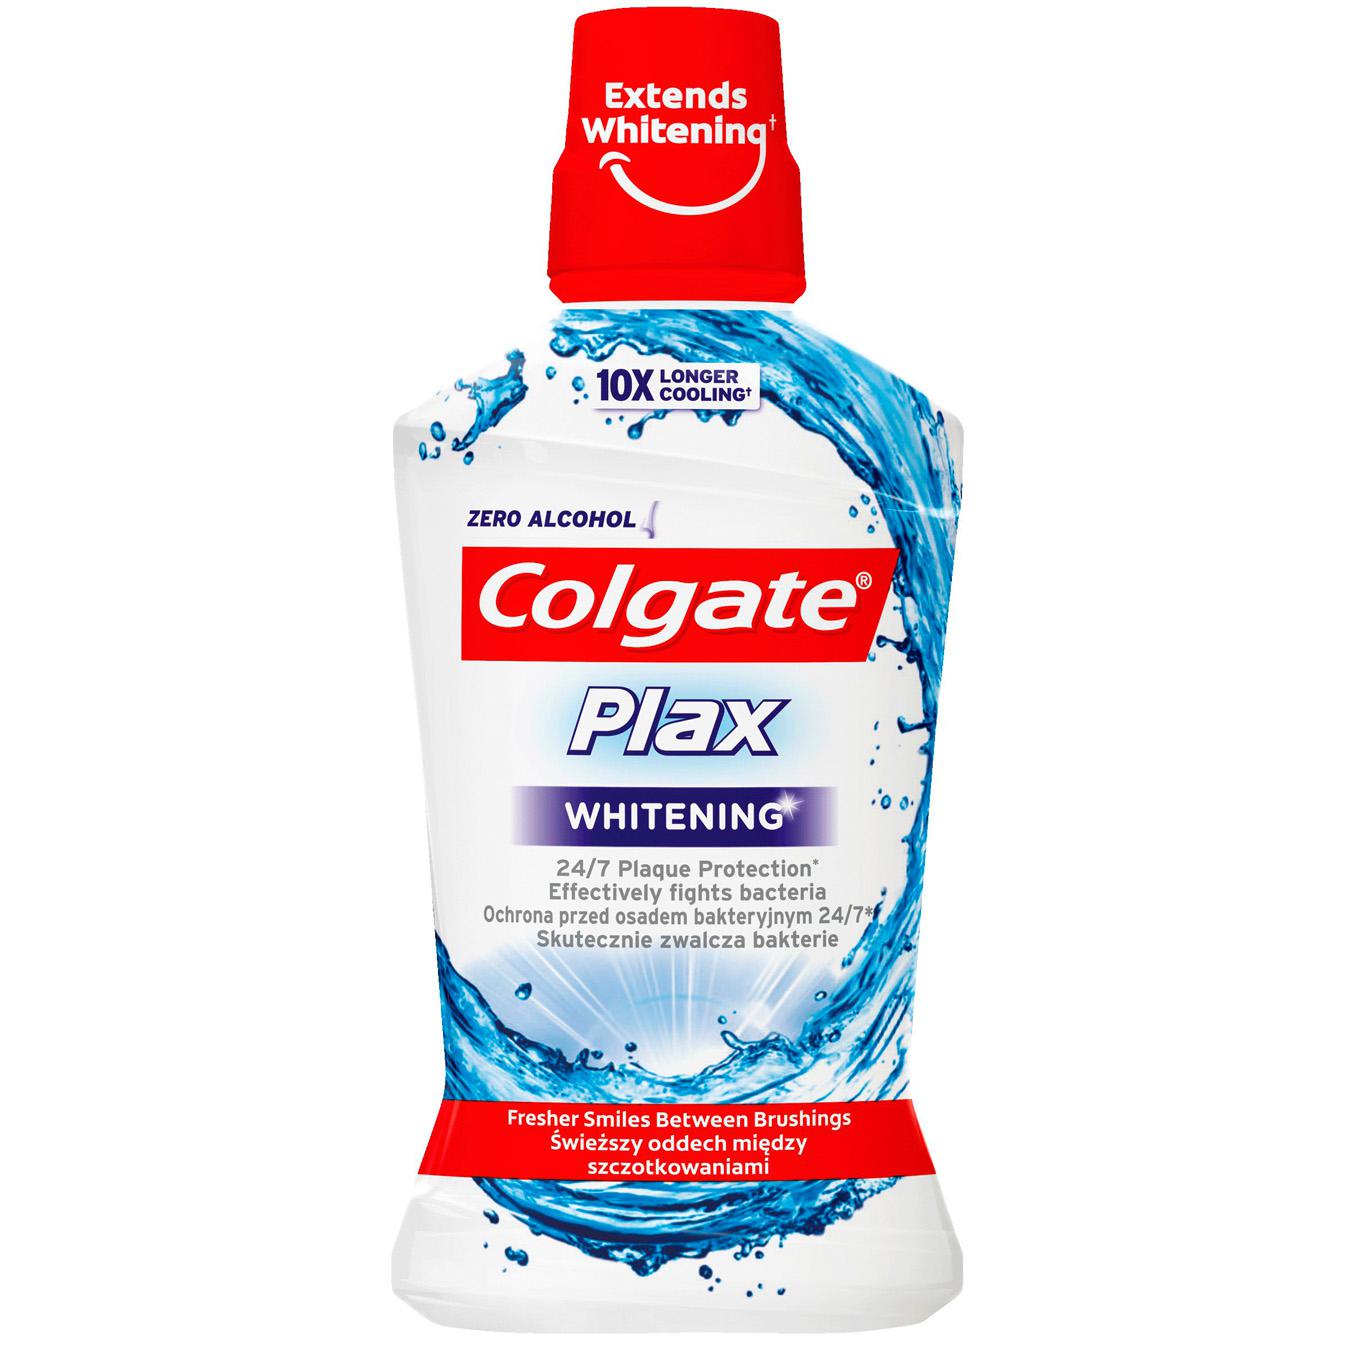 Colgate Plax mouthwash with whitening effect 500ml